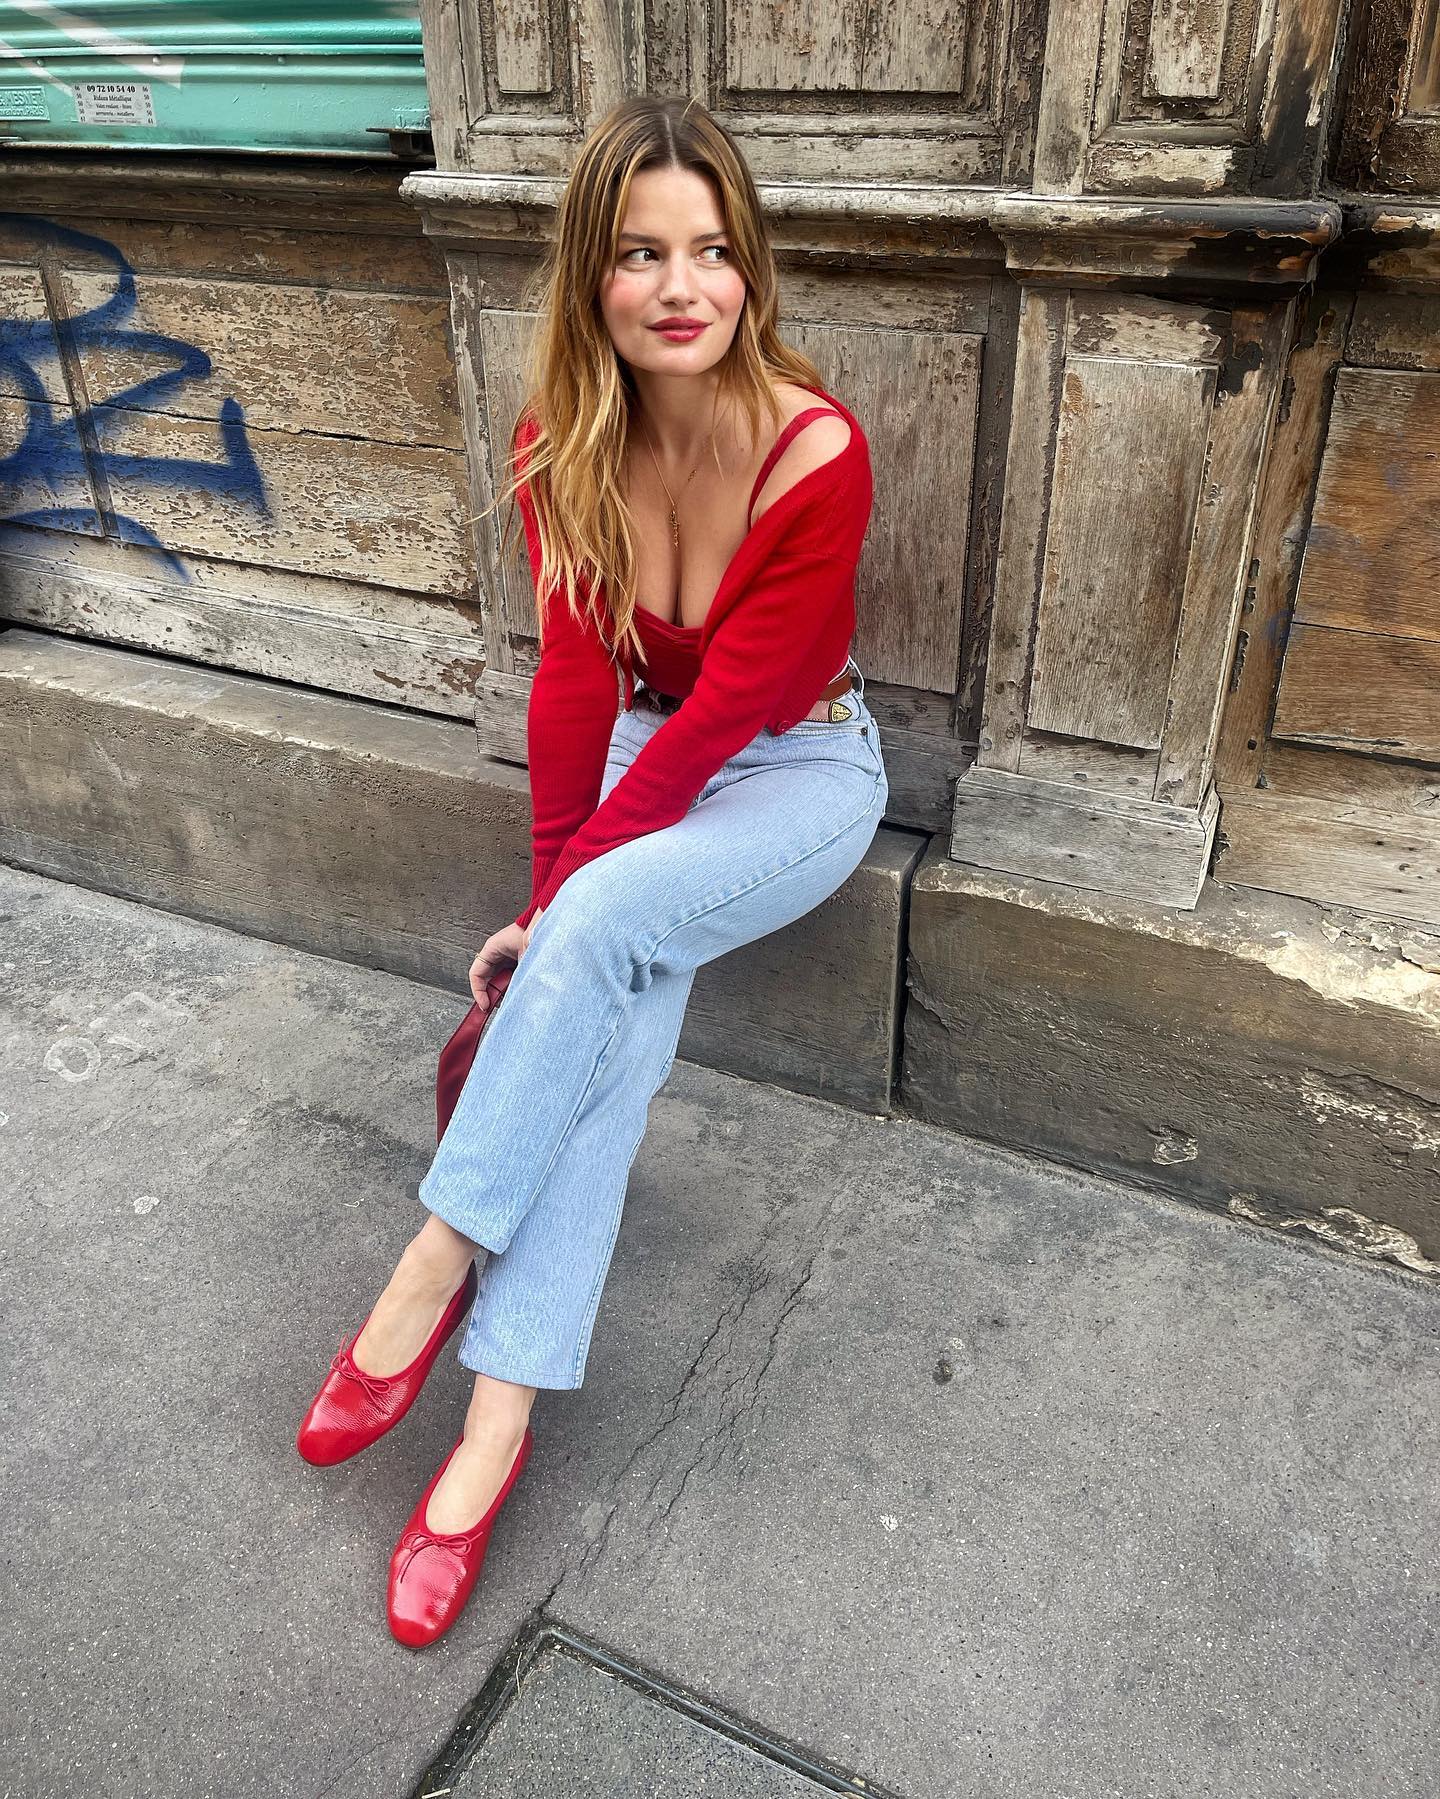 French influencer Sabina Socol sits on a ledge on a Paris sidewalk wearing a red cardigan, a red tank top, light-wash jeans, and red ballet flats